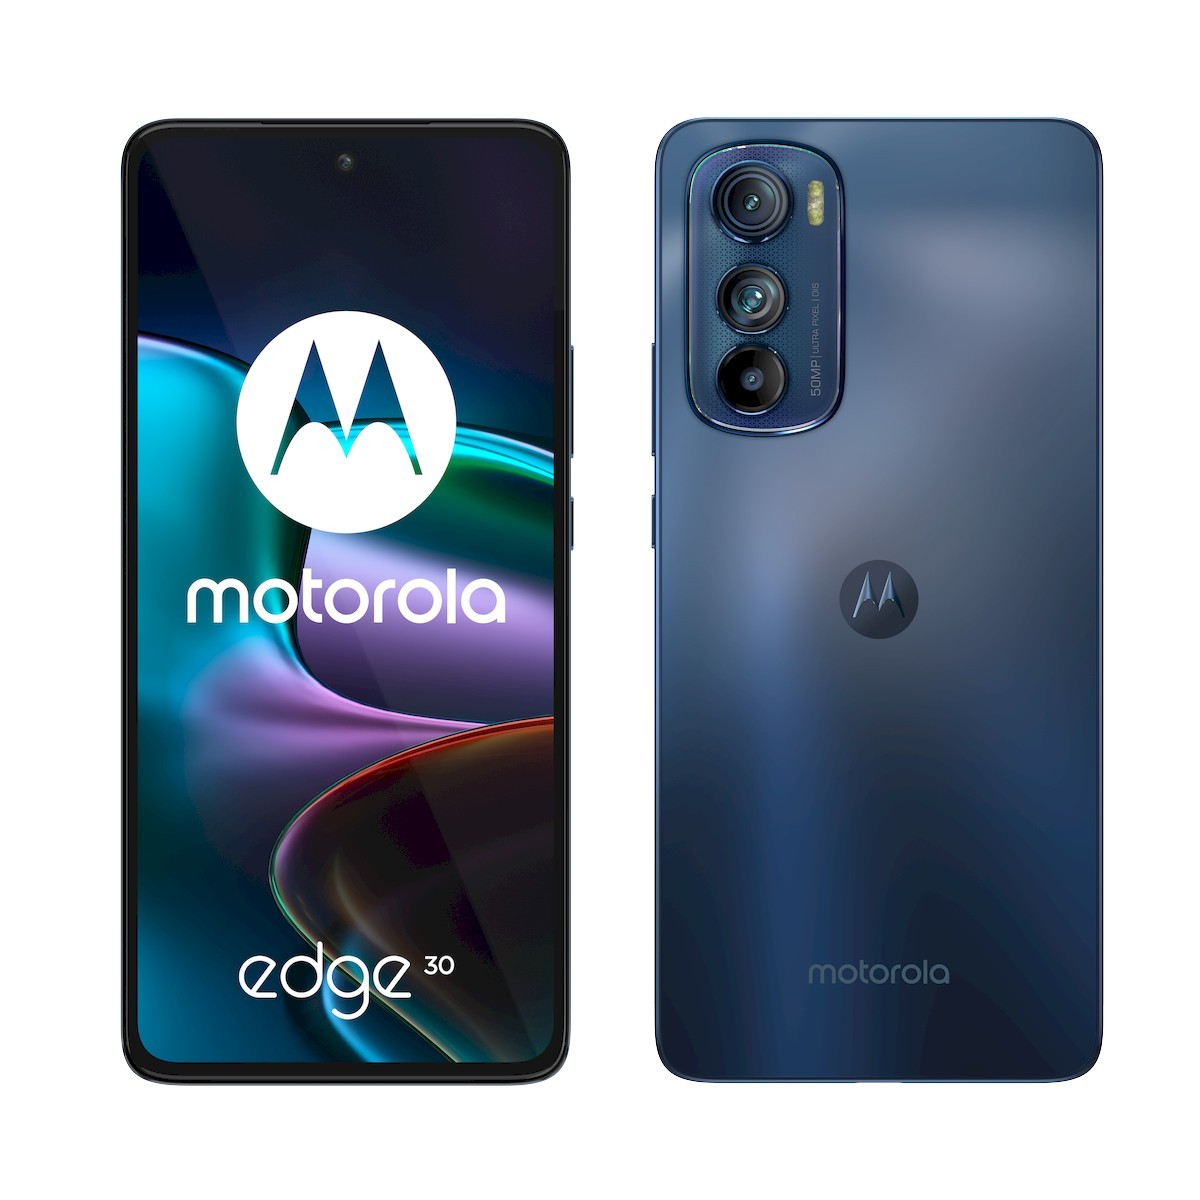 Motorola Edge 30 goes official with 6.5" 144Hz OLED display, SD778G+ 